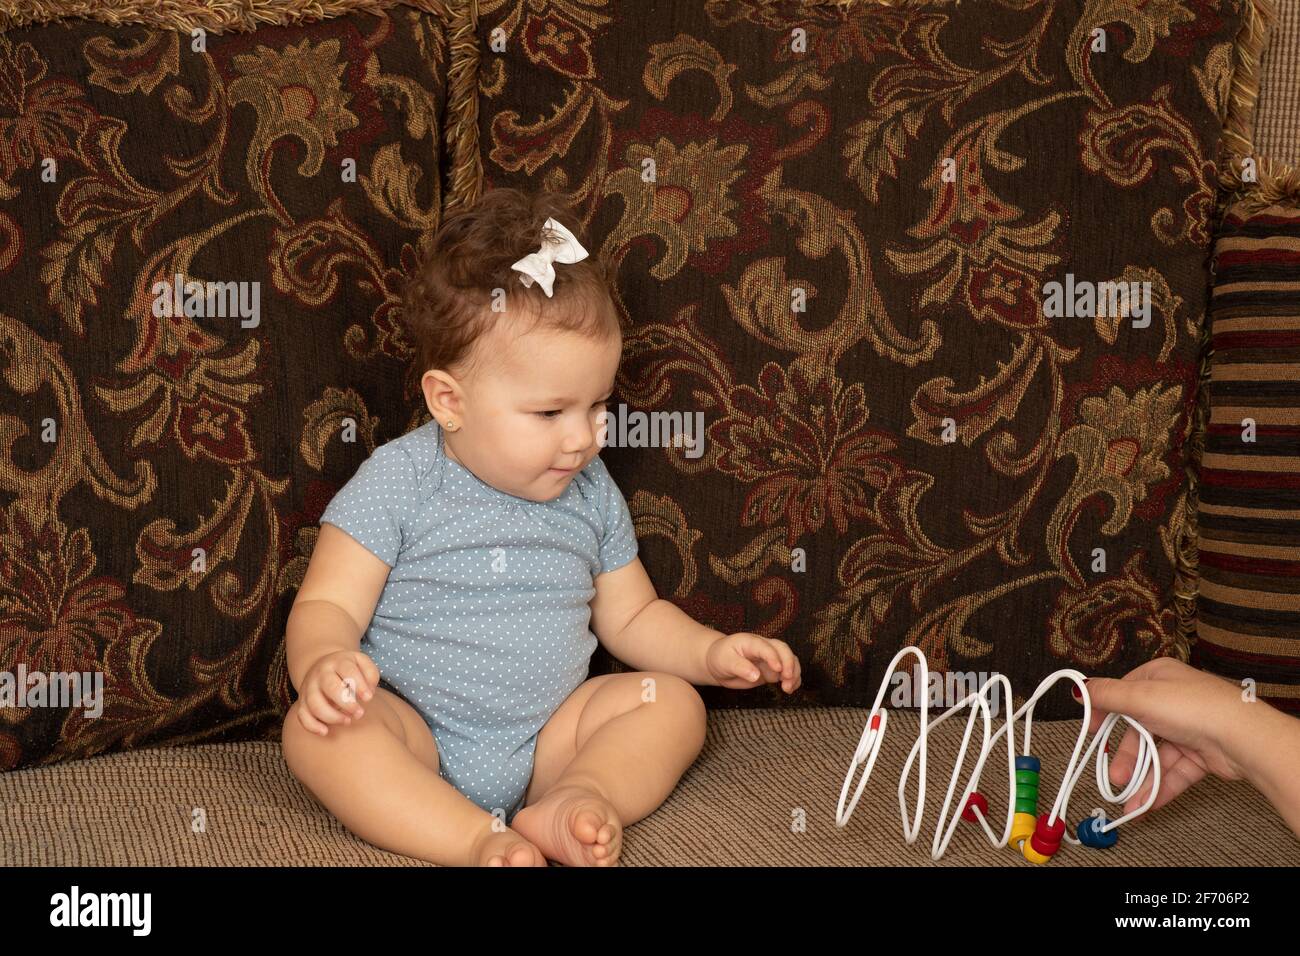 7 month old baby girl sitting on couch interested in wire bead toy Piaget Object Permanence series 1 of 2 Stock Photo